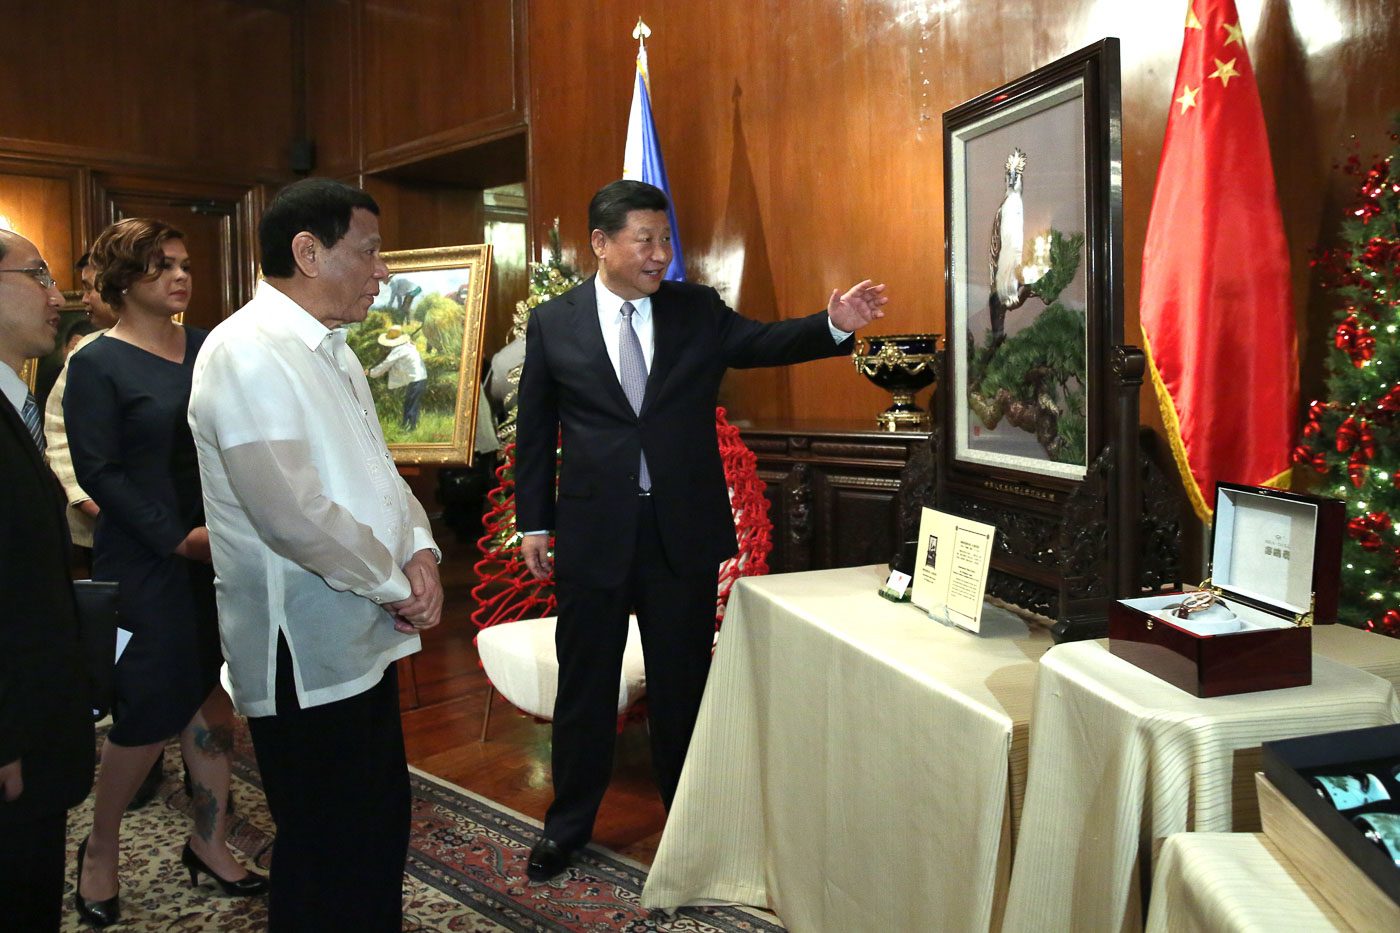 Xi Jinping invites Duterte to visit China a 4th time